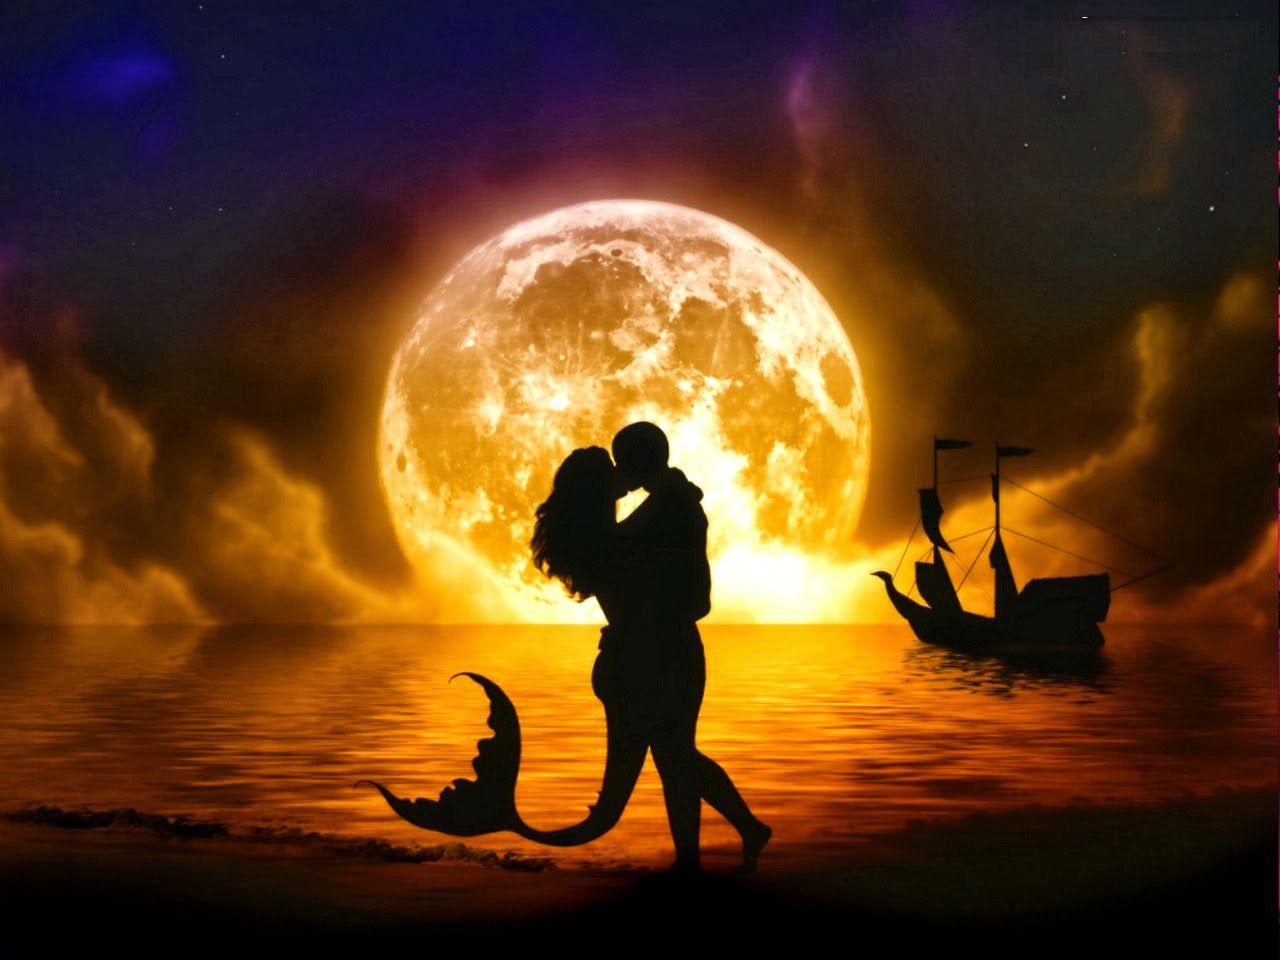 Romantic Love Picture for her and Kiss, Couples Dance